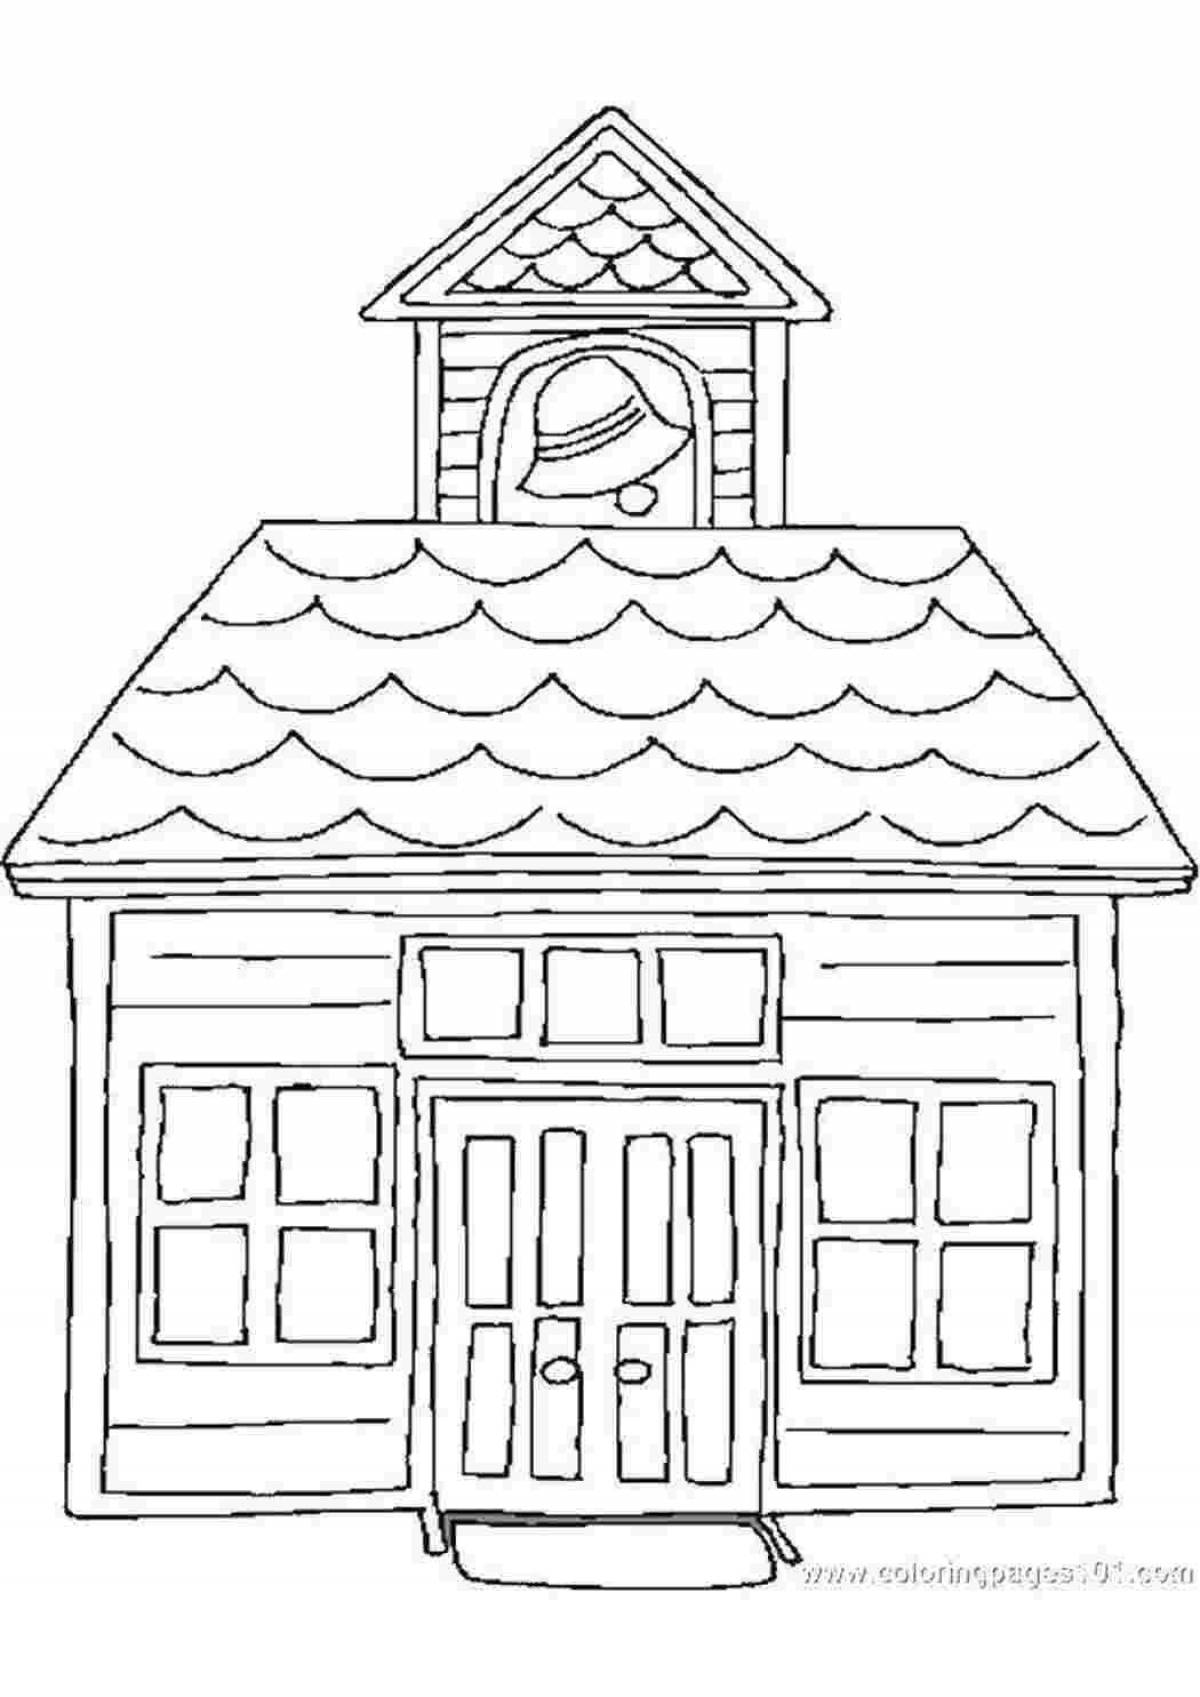 Colorful house roof coloring book